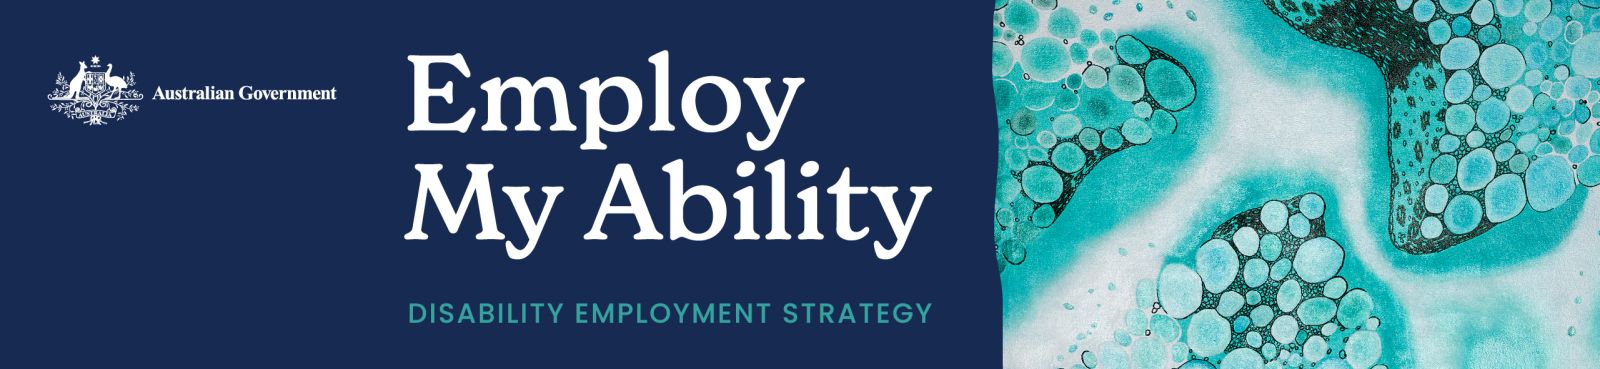 Employ My Ability – the Disability Employment Strategy